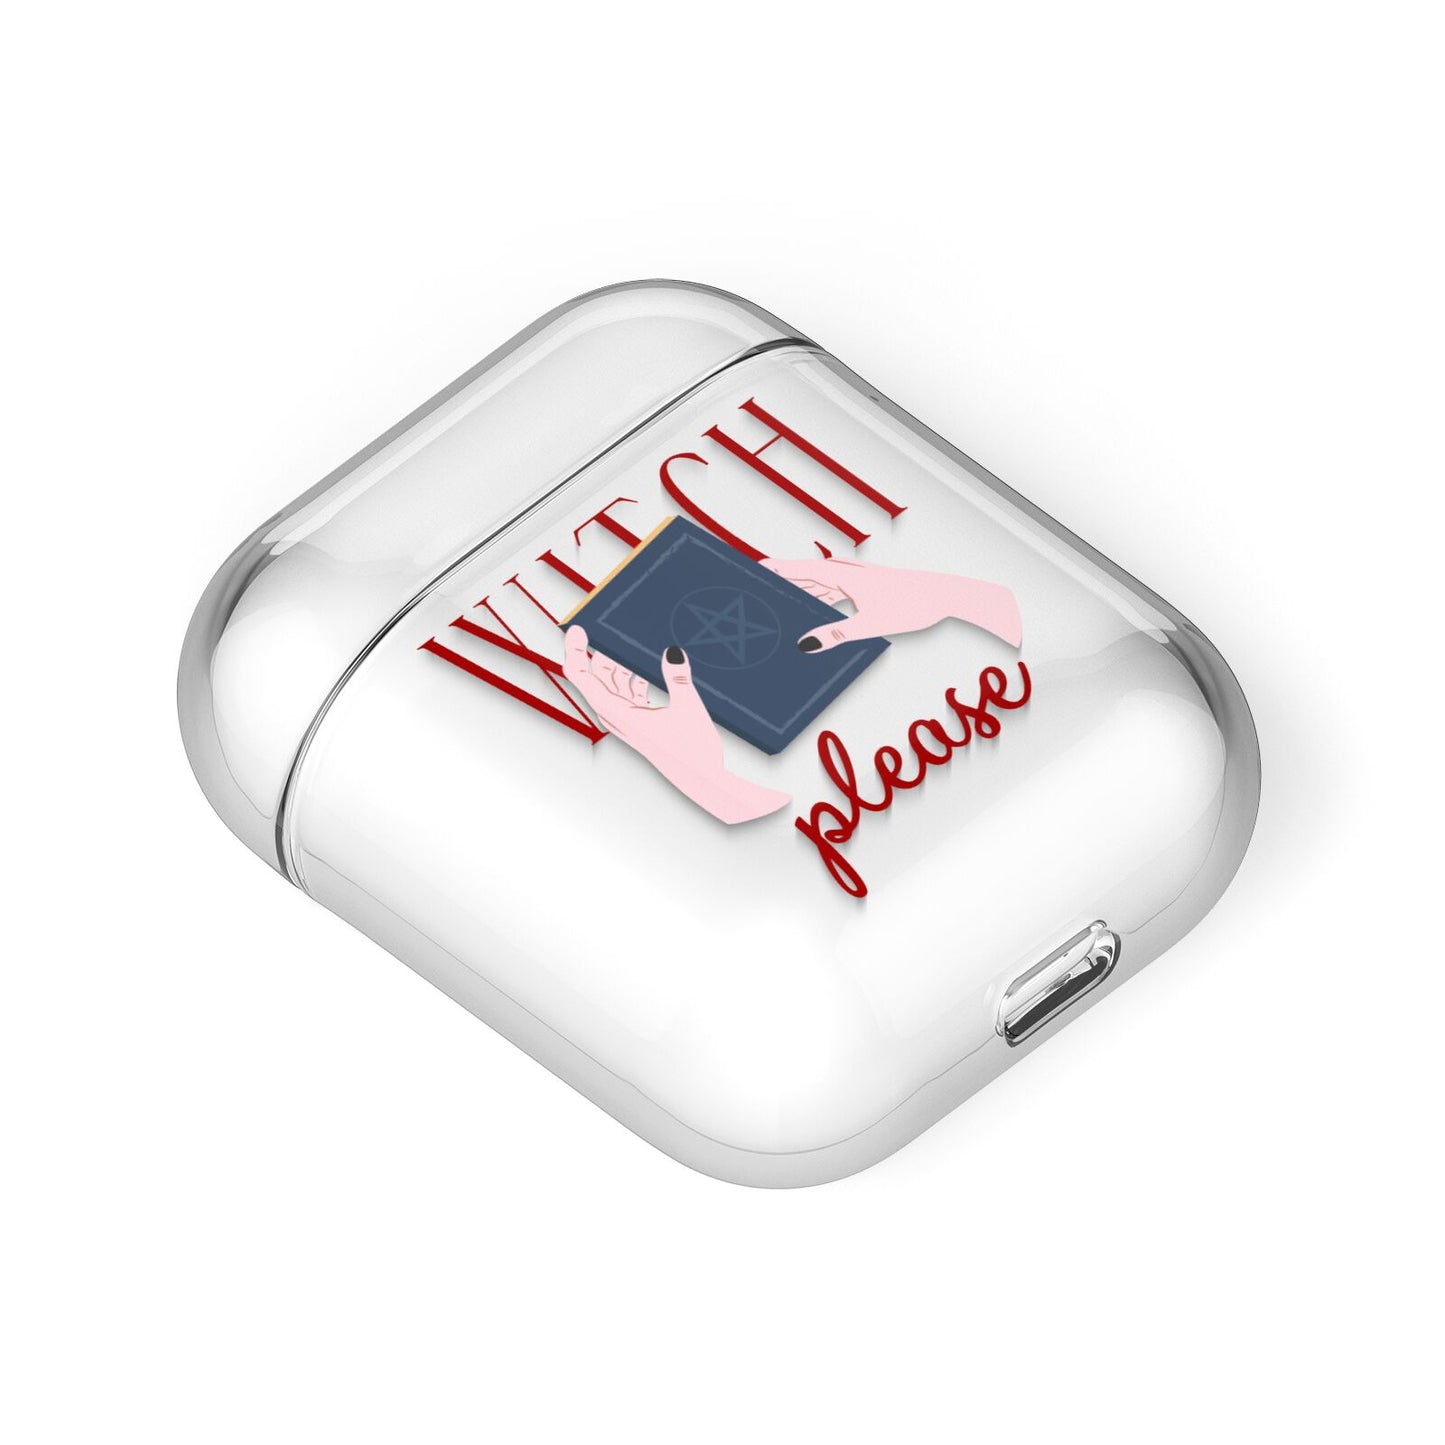 Witty Witch Illustration AirPods Case Laid Flat